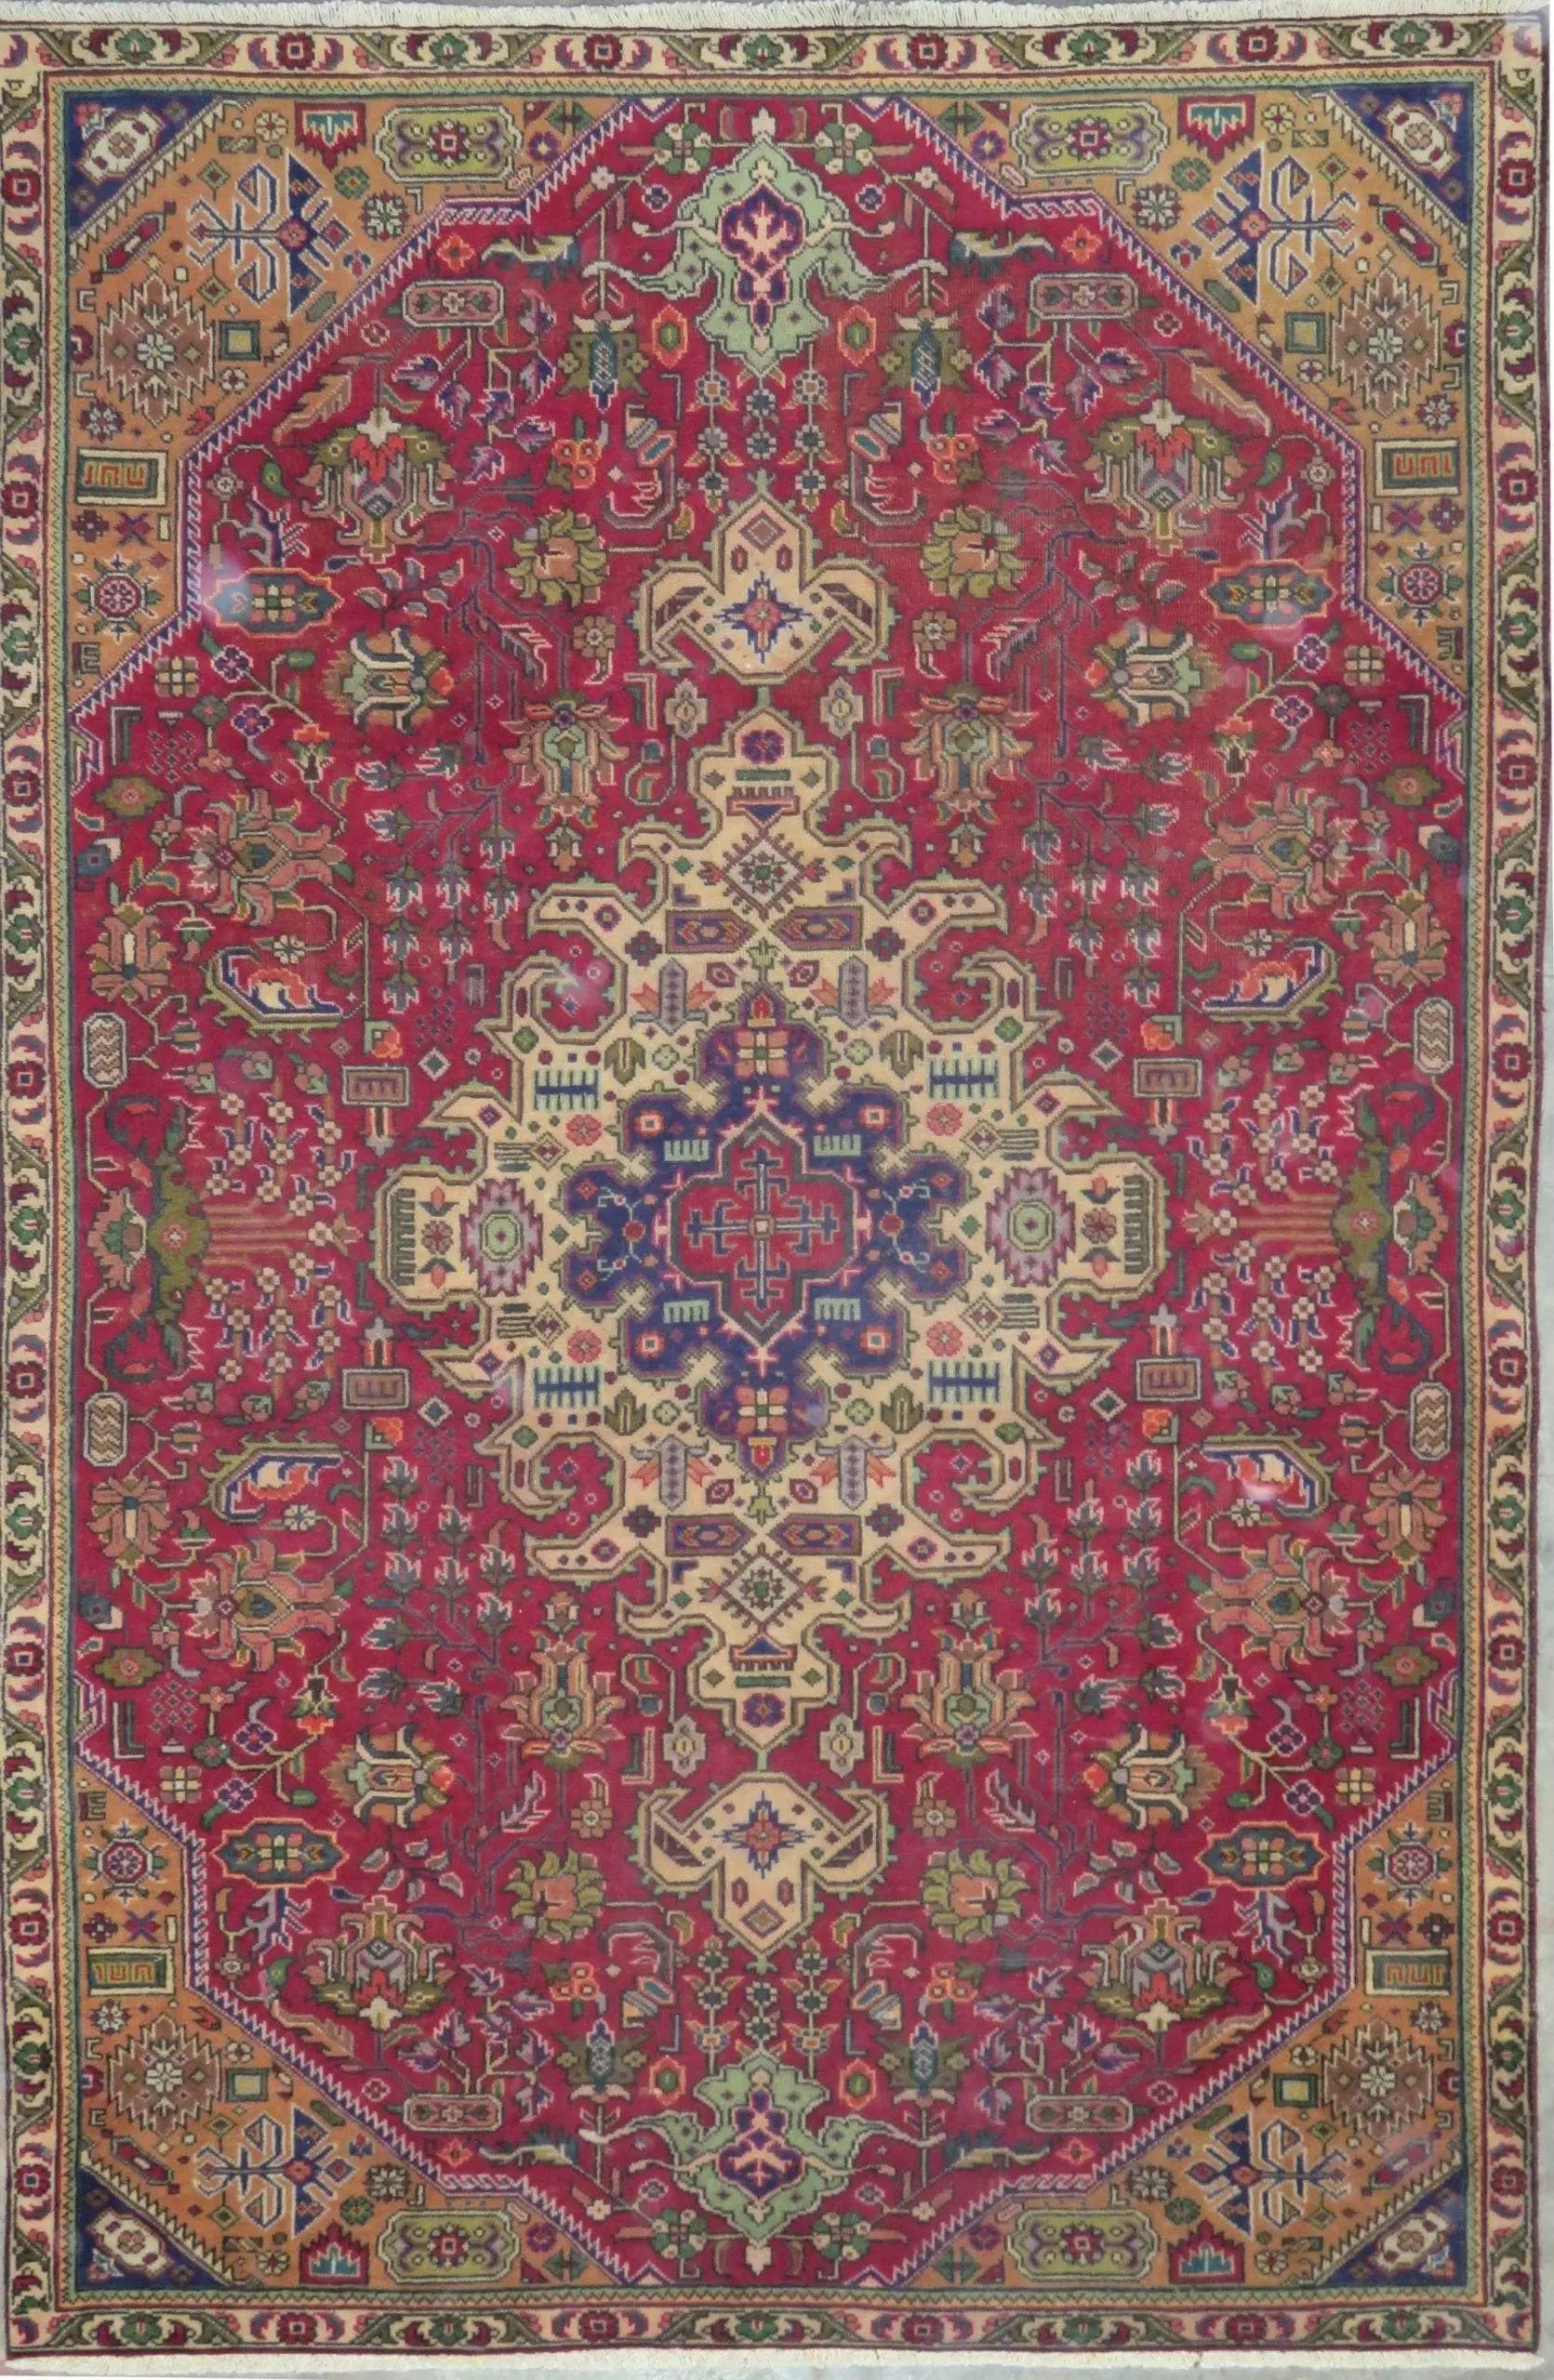 Hand-Knotted Persian Wool Rug _ Luxurious Vintage Design, 7'5" x 5'0", Artisan Crafted